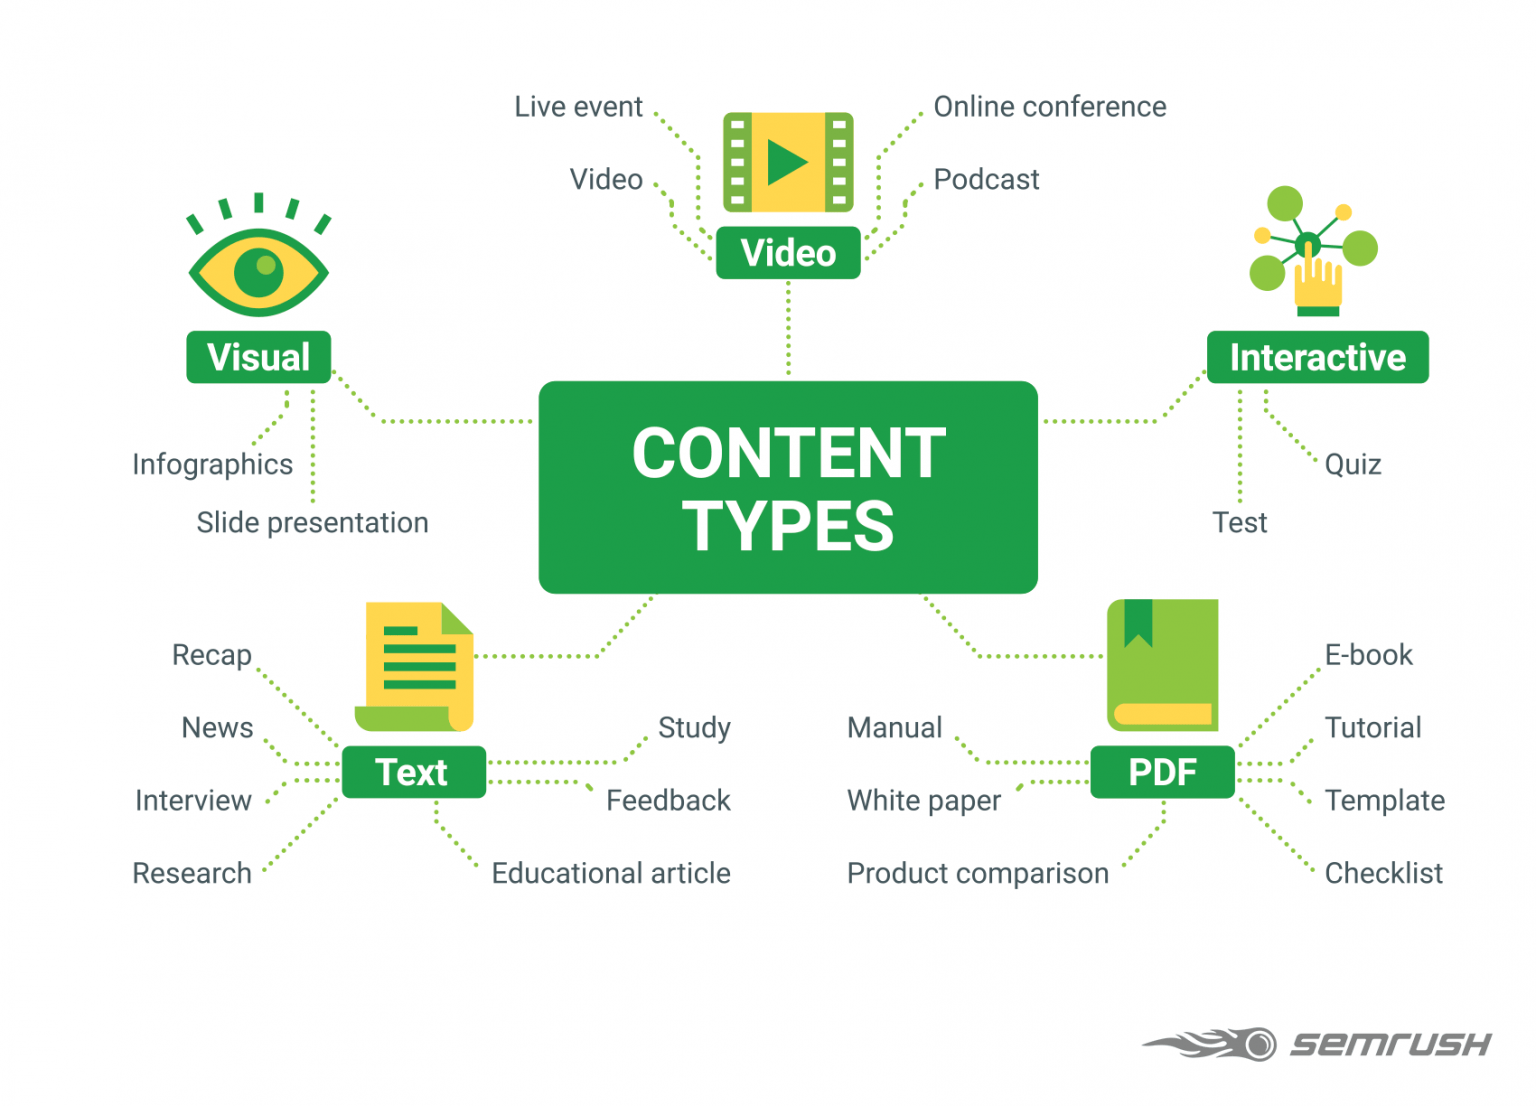  A mind map of content types, including visual, interactive, text, and PDF.